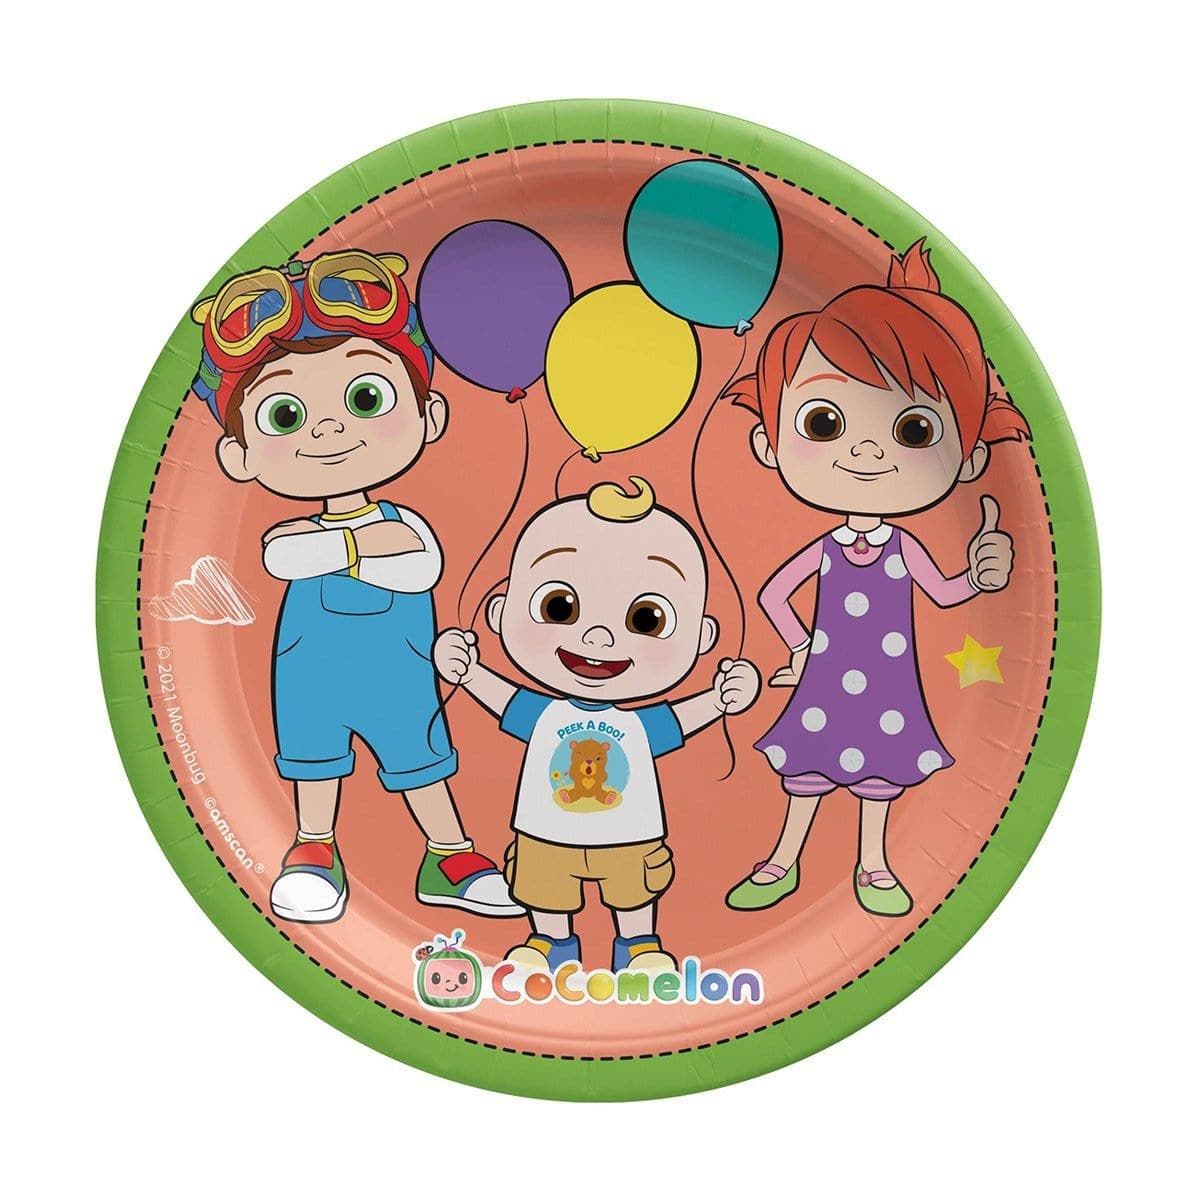 Buy Kids Birthday Cocomelon Dessert Plates 7 Inches, 8 Count sold at Party Expert